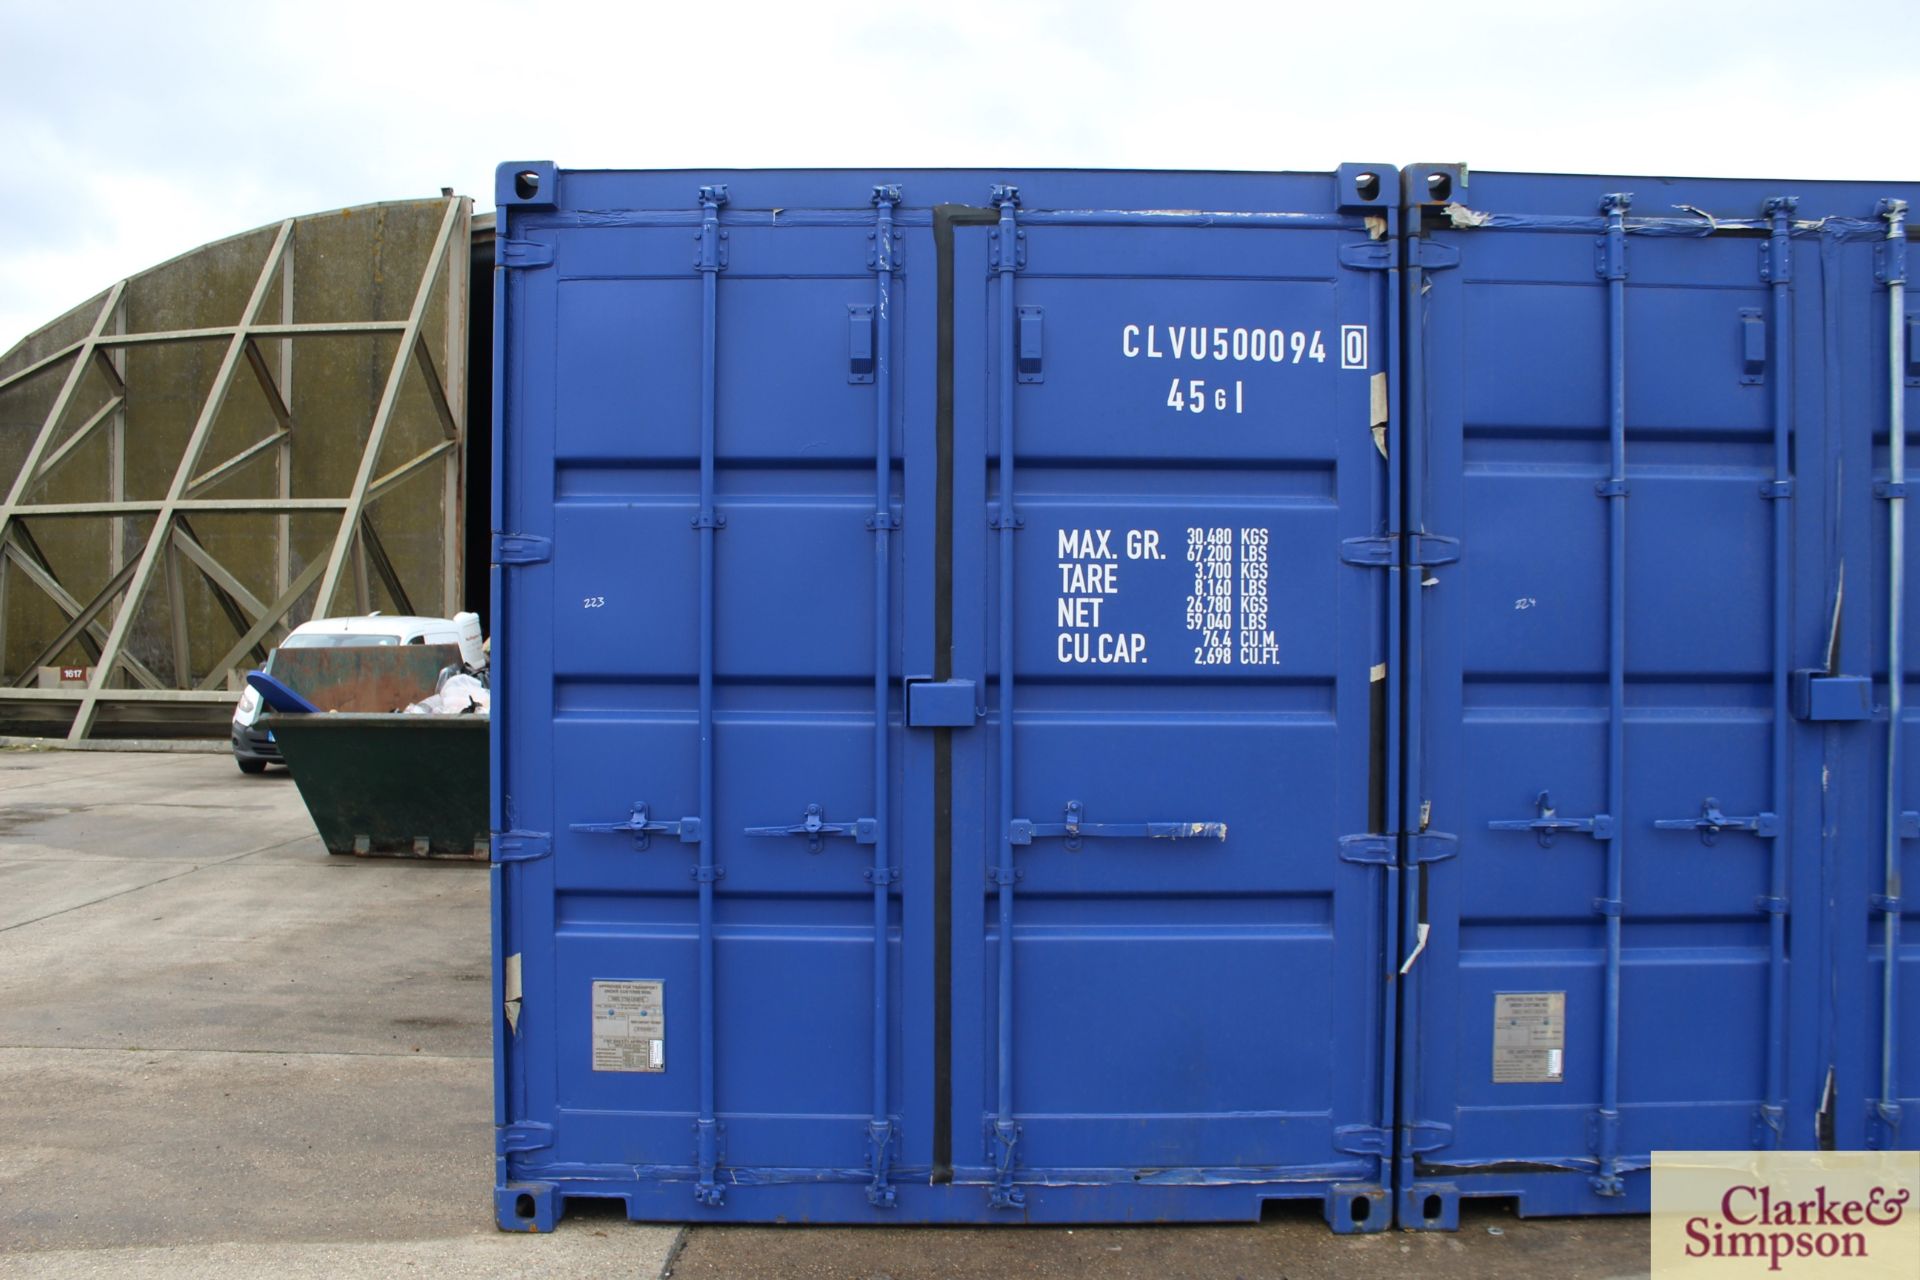 40ft x 9ft6in high shipping container. 2019. Heavily reinforced to interior to include plates - Image 2 of 16